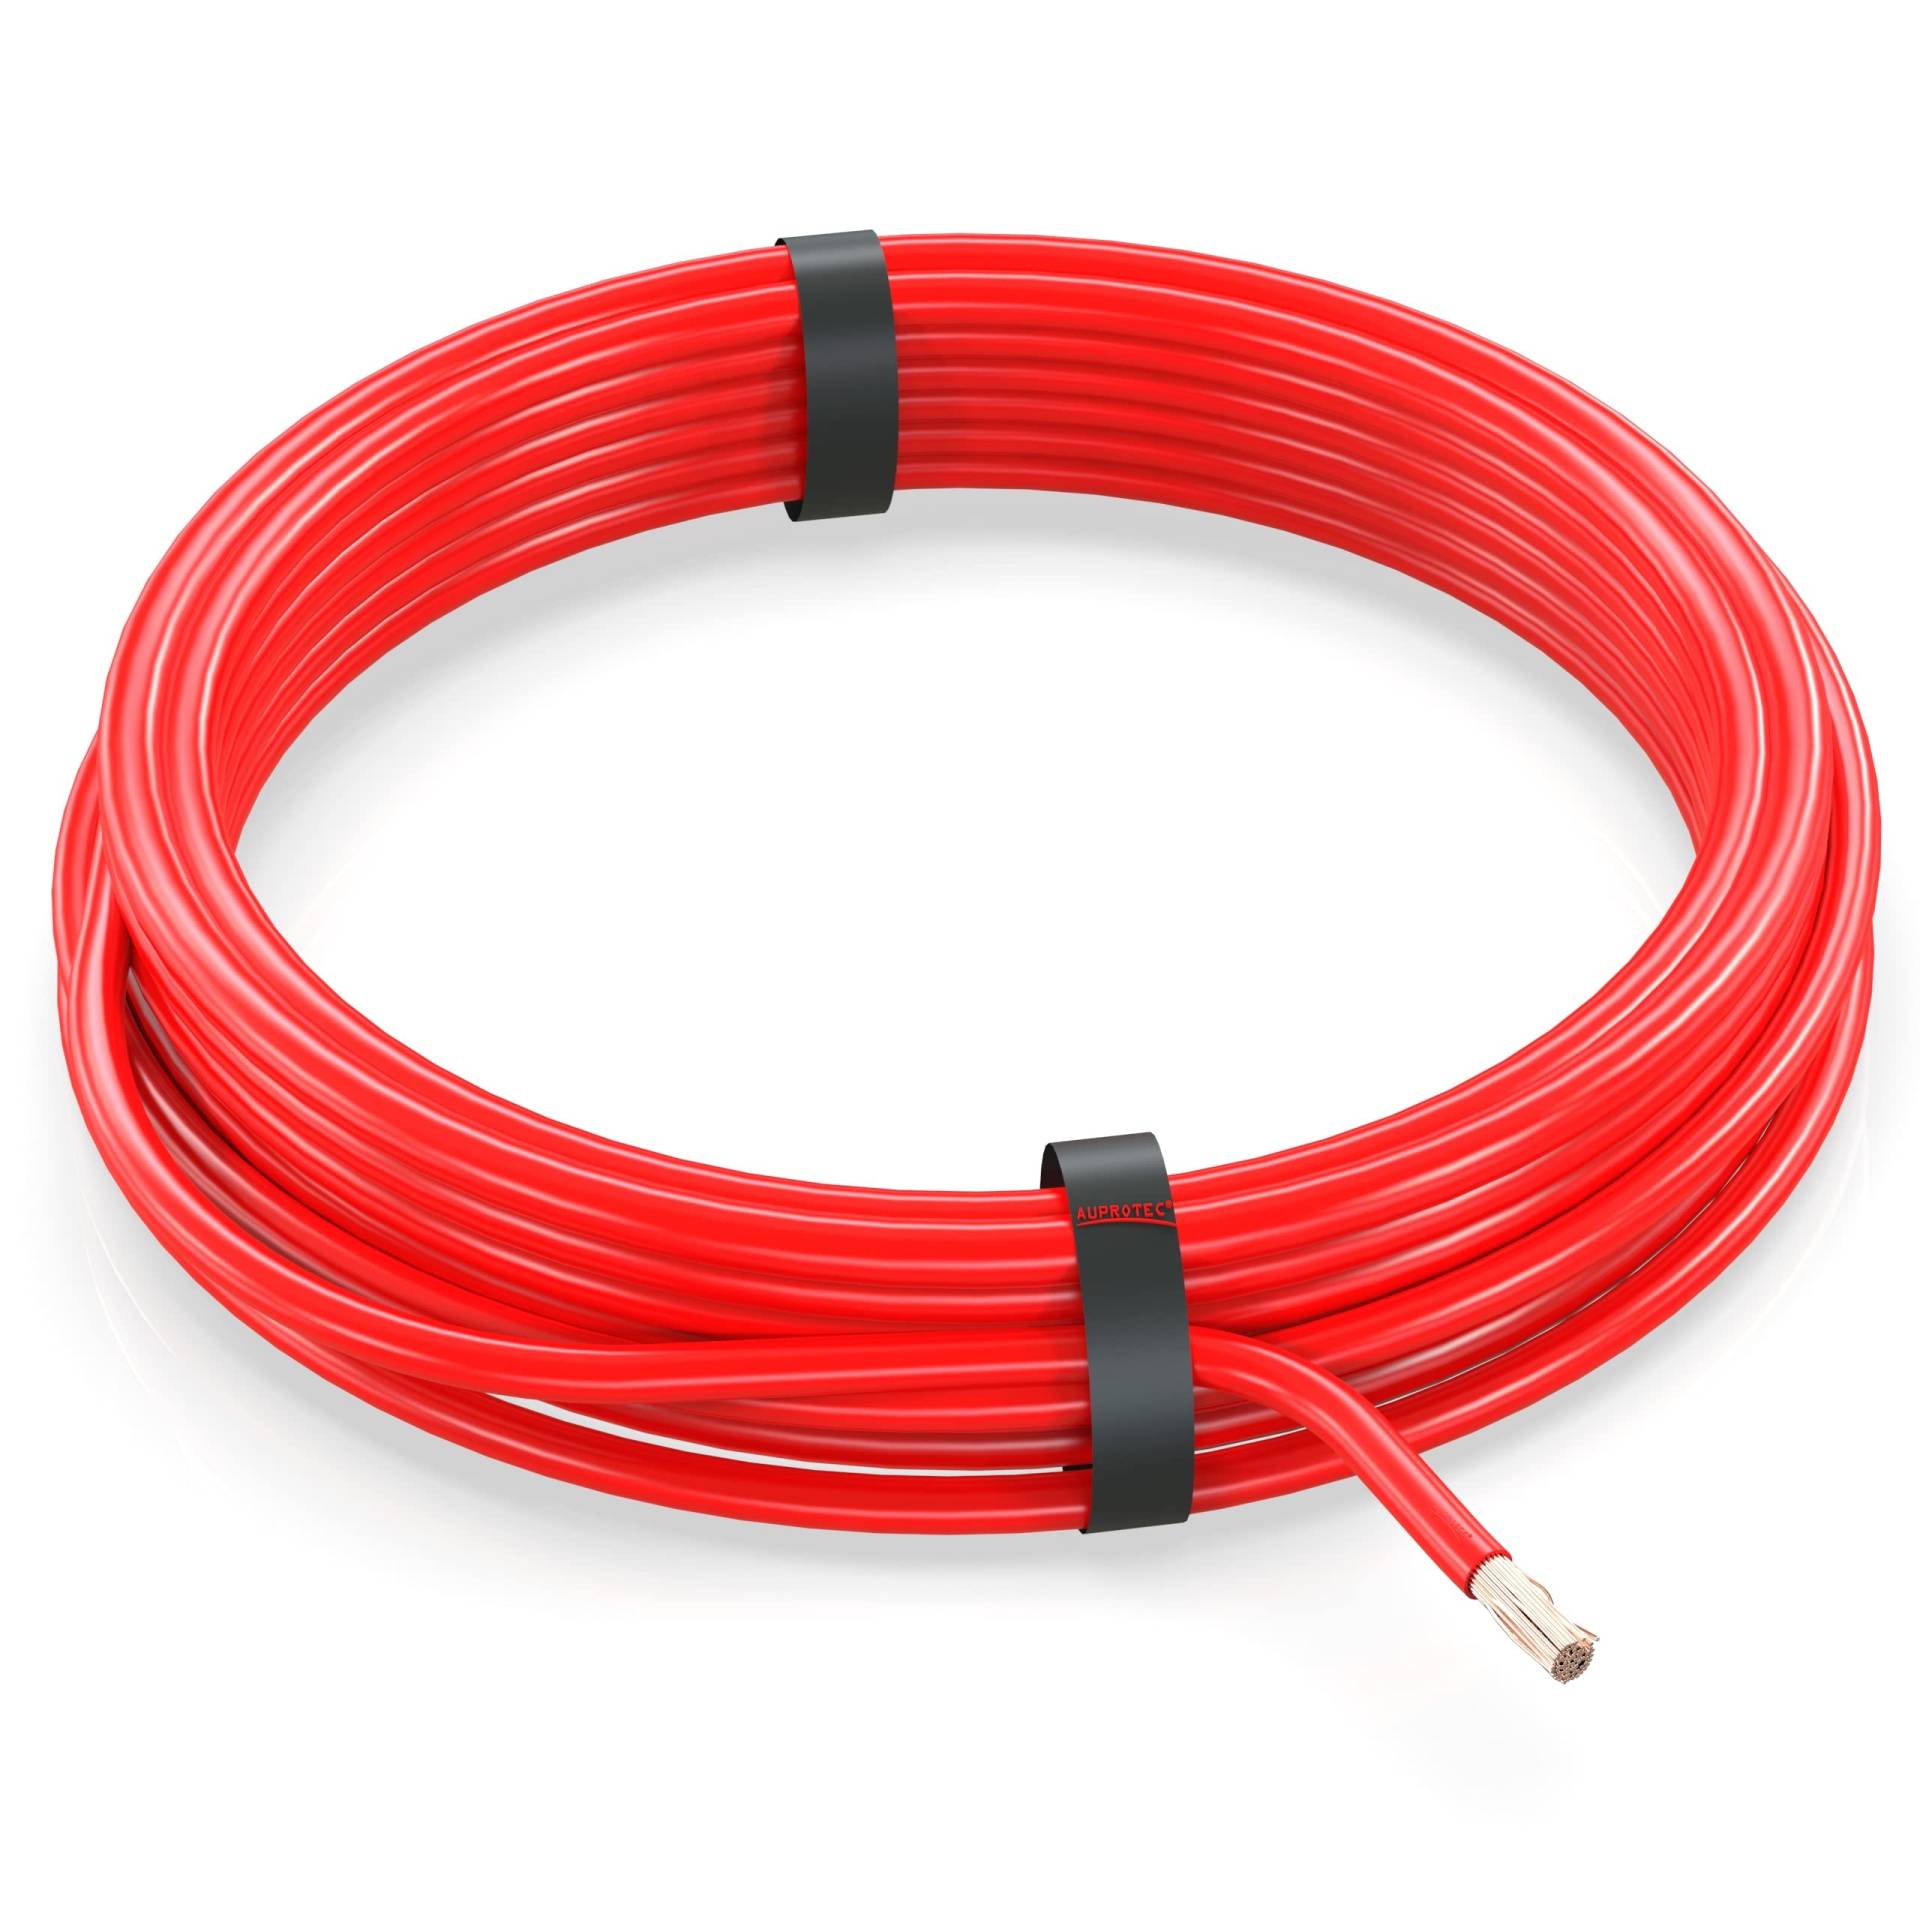 AUPROTEC 5m Fahrzeugleitung 1,0 mm² FLRY-B Auto Kabel als Ring Farbe rot von AUPROTEC